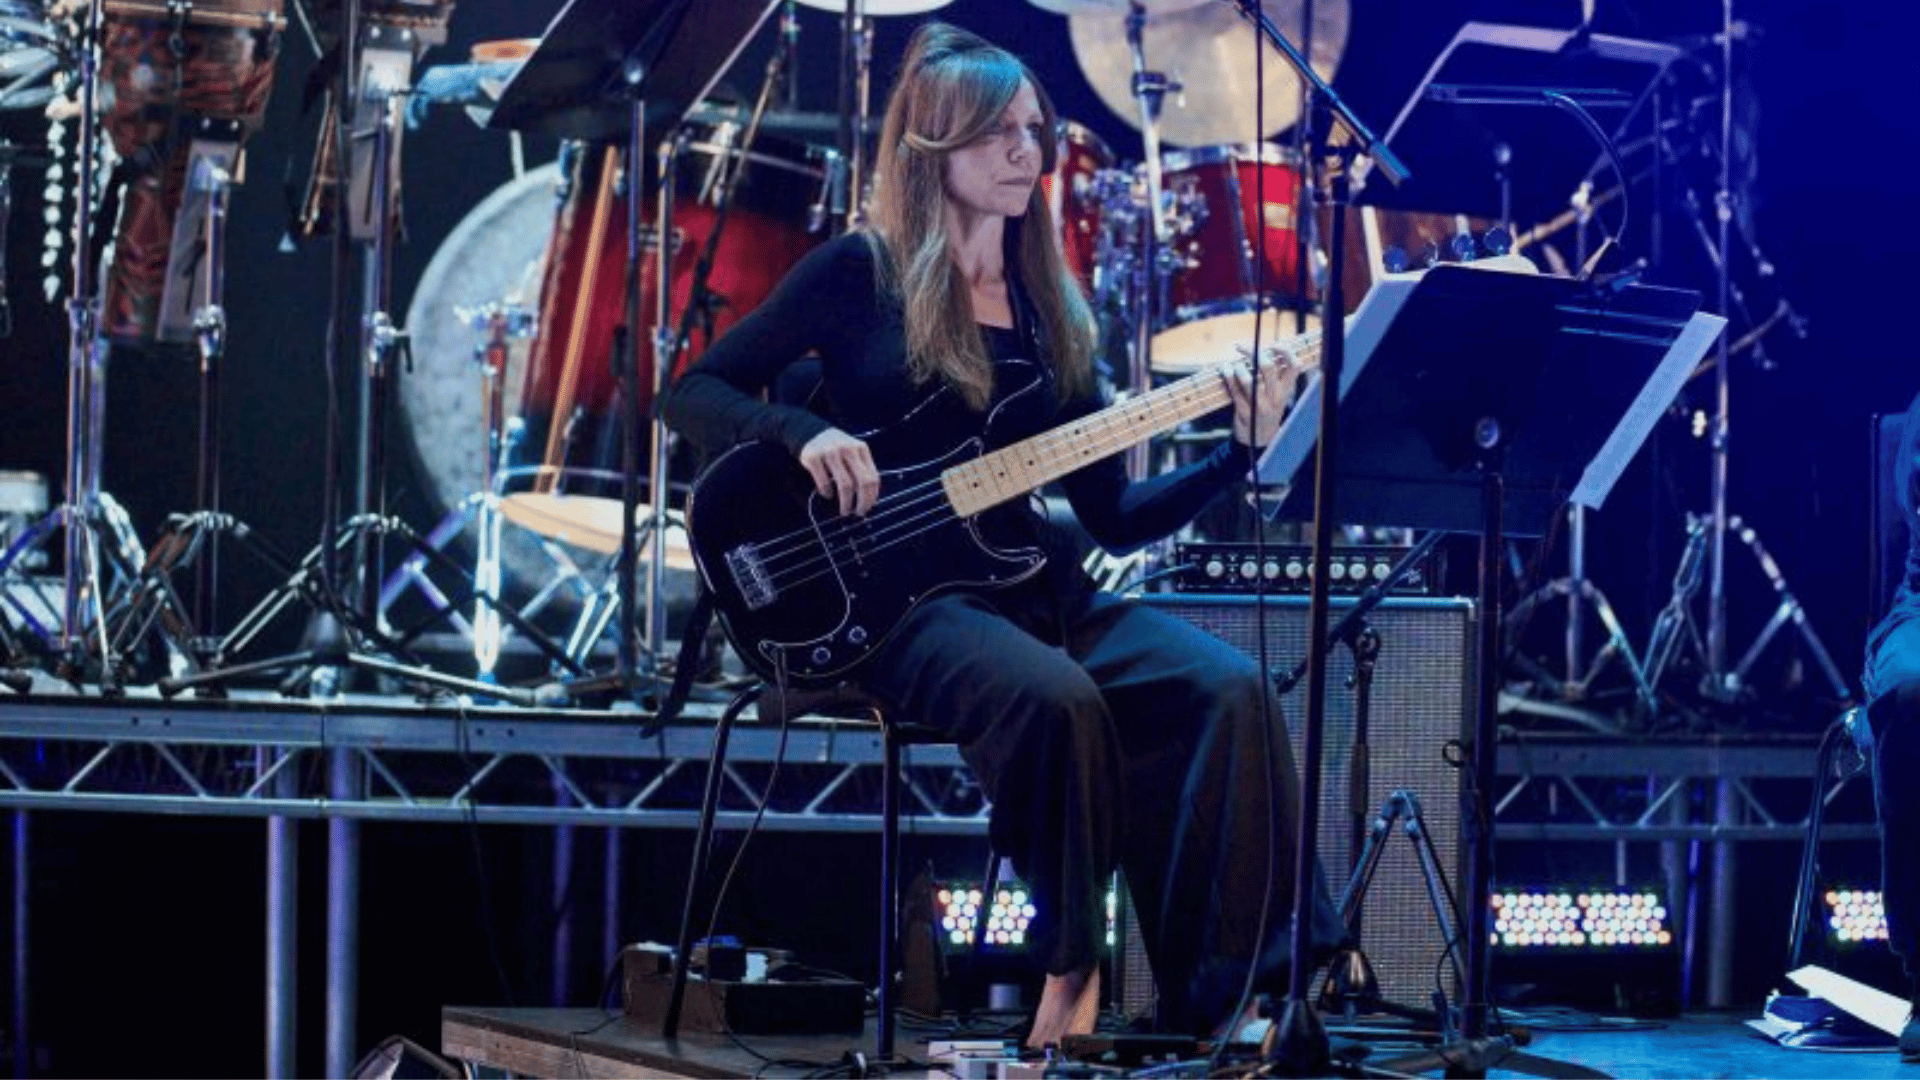 A woman in a black outfit, sat in front of a drum kit playing a bass guitar.